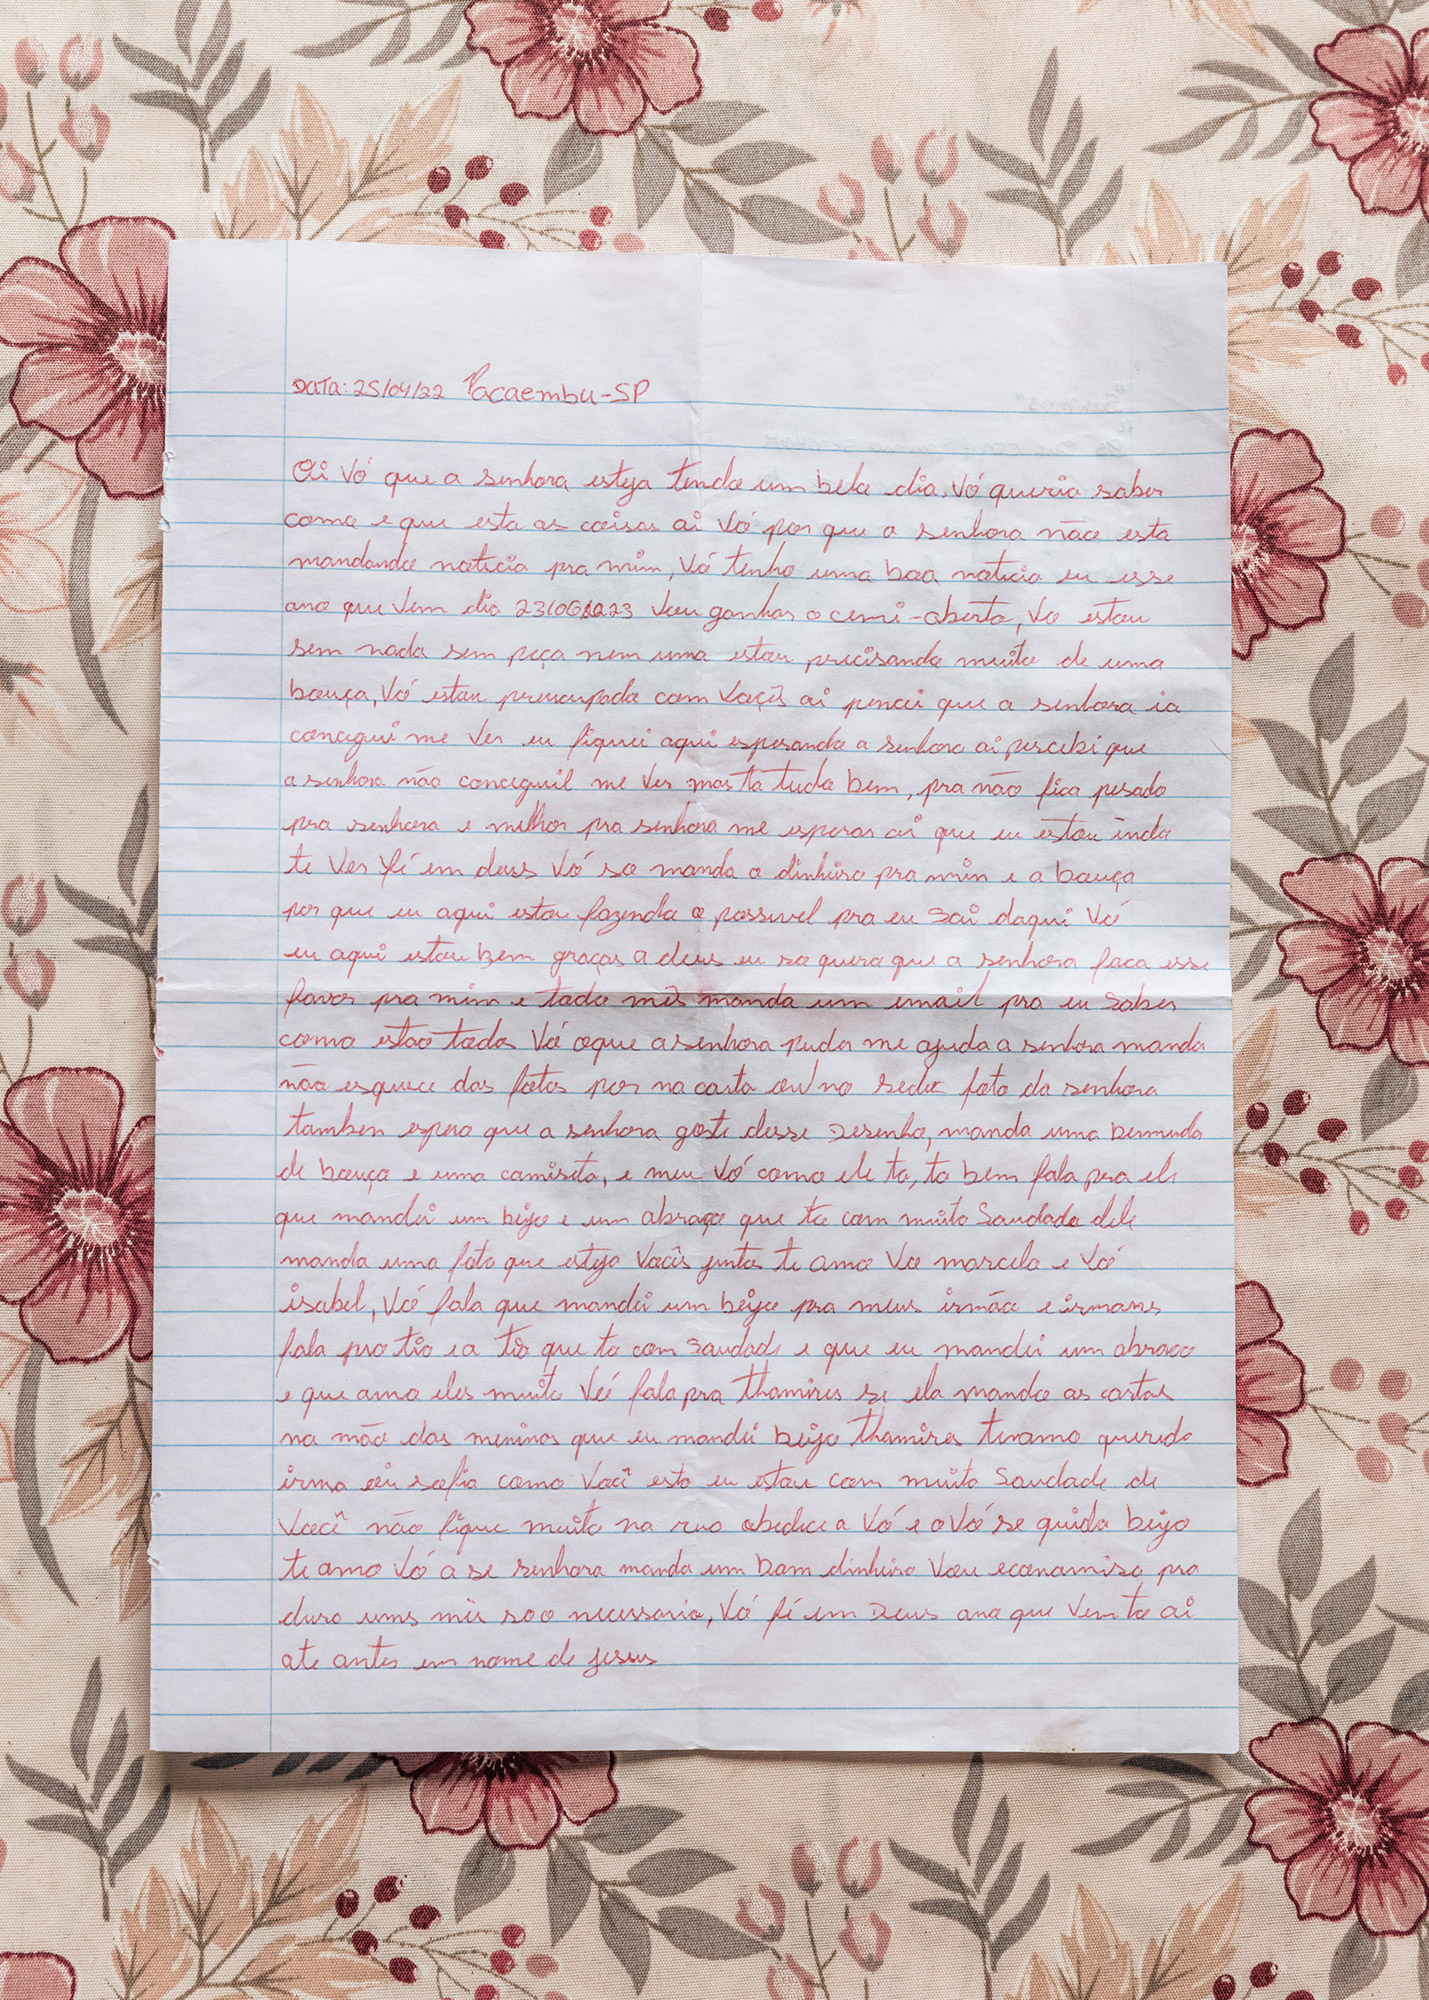 A letter from an inmate to her mother.